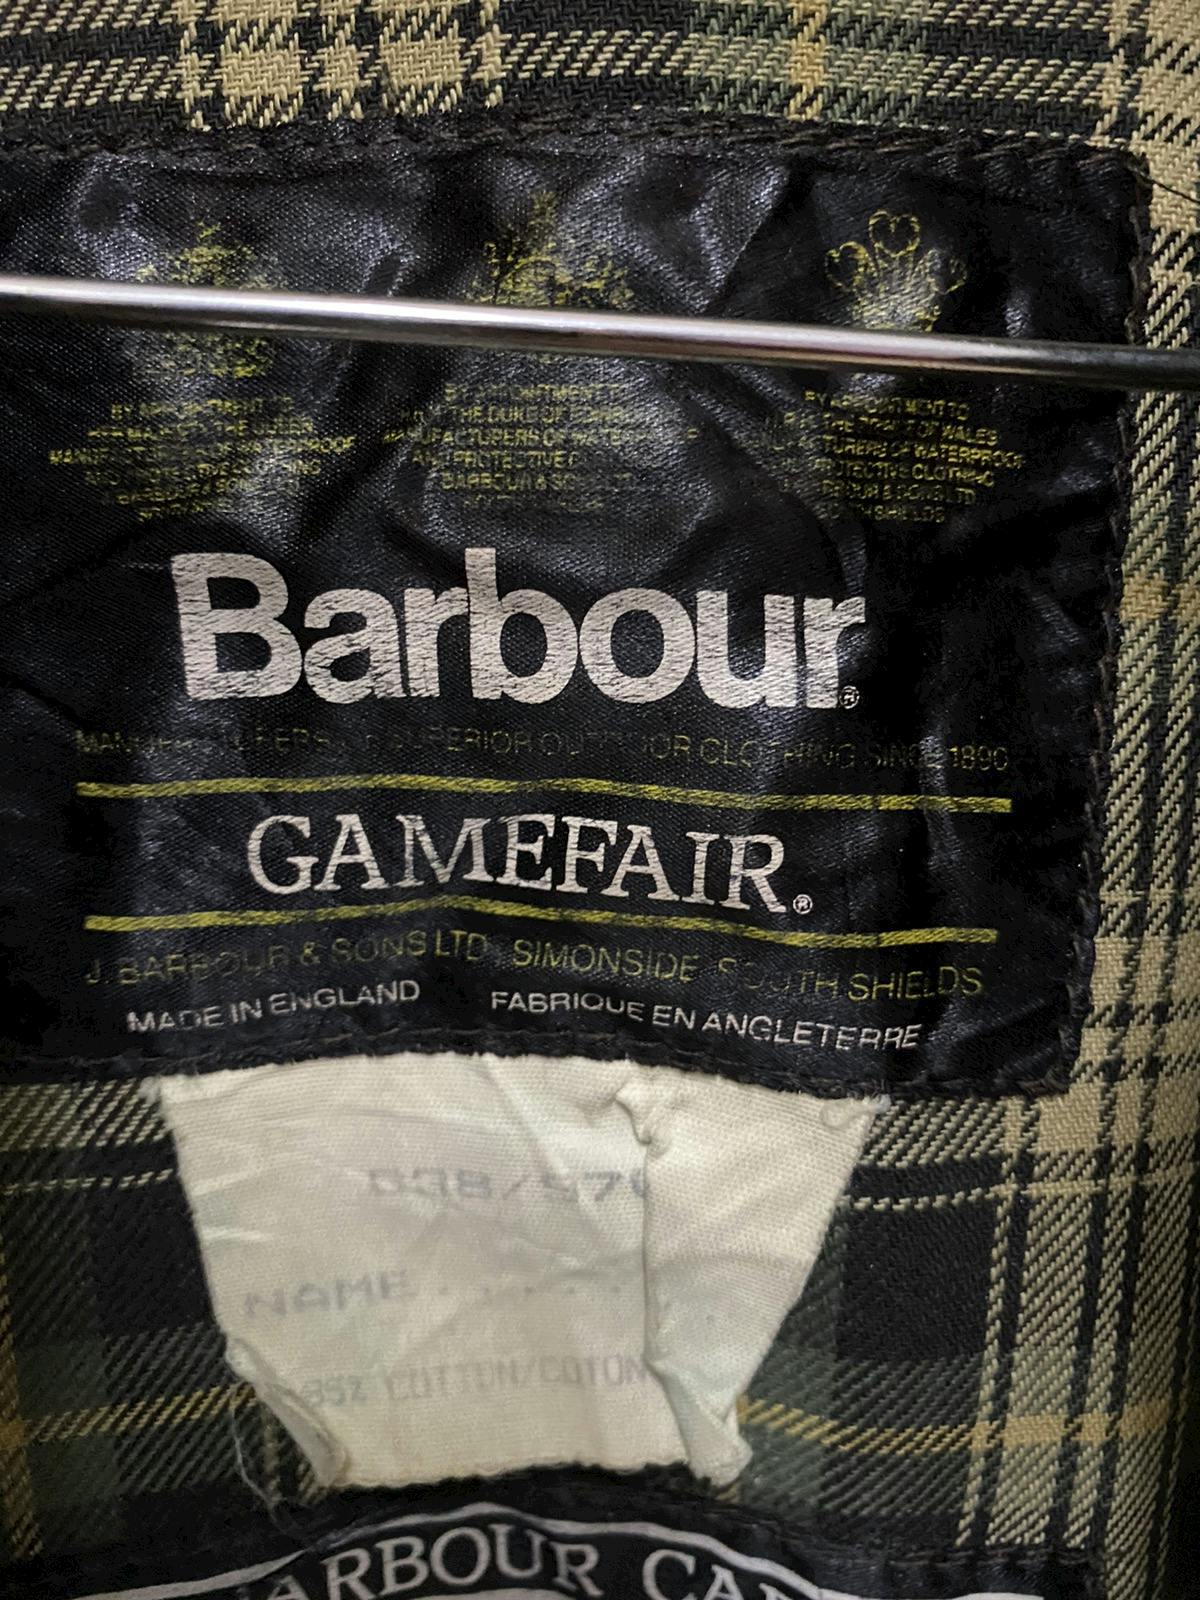 Barbour Gamefair Waxed Jacket Made in England - 11